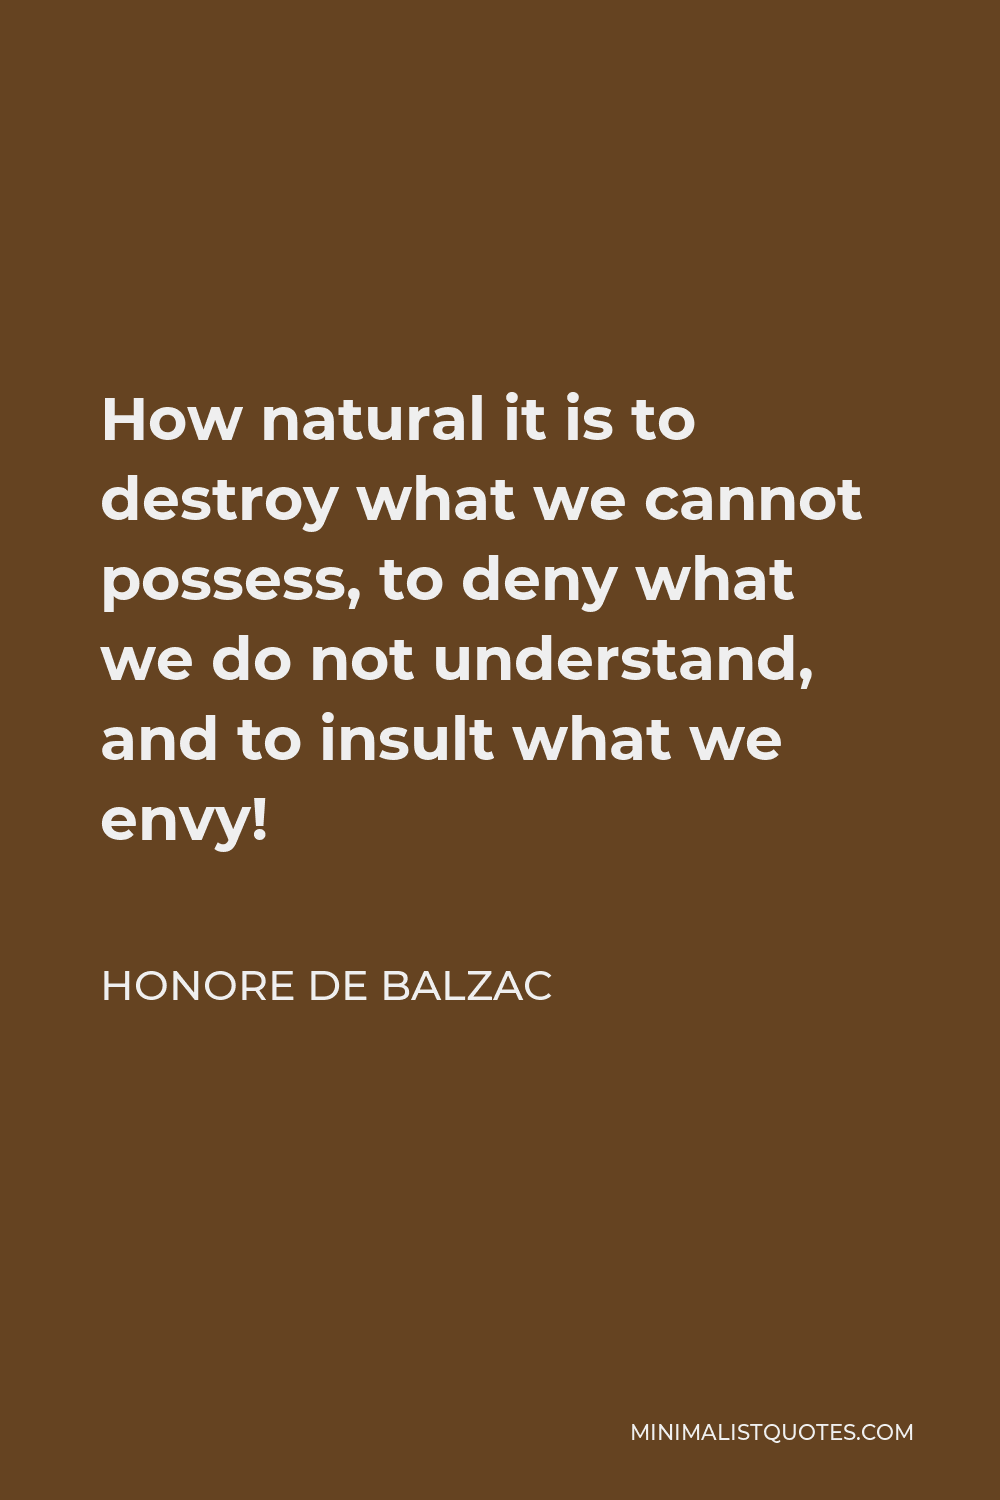 Honore de Balzac Quote - How natural it is to destroy what we cannot possess, to deny what we do not understand, and to insult what we envy!